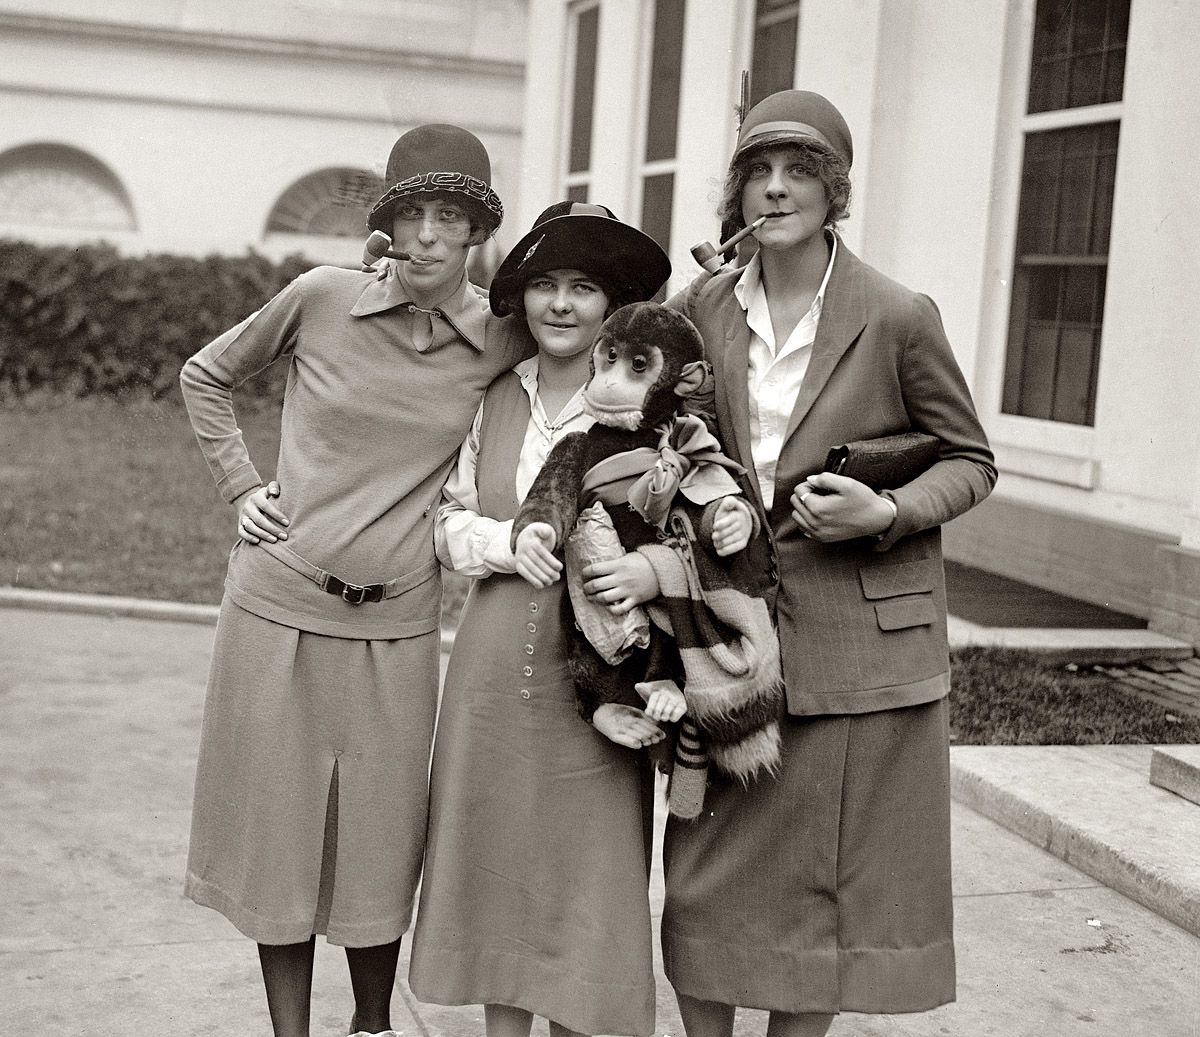 October 6, 1925. "West Philadelphia High School girls at the White House." National Photo Company Collection glass negative. View full size.